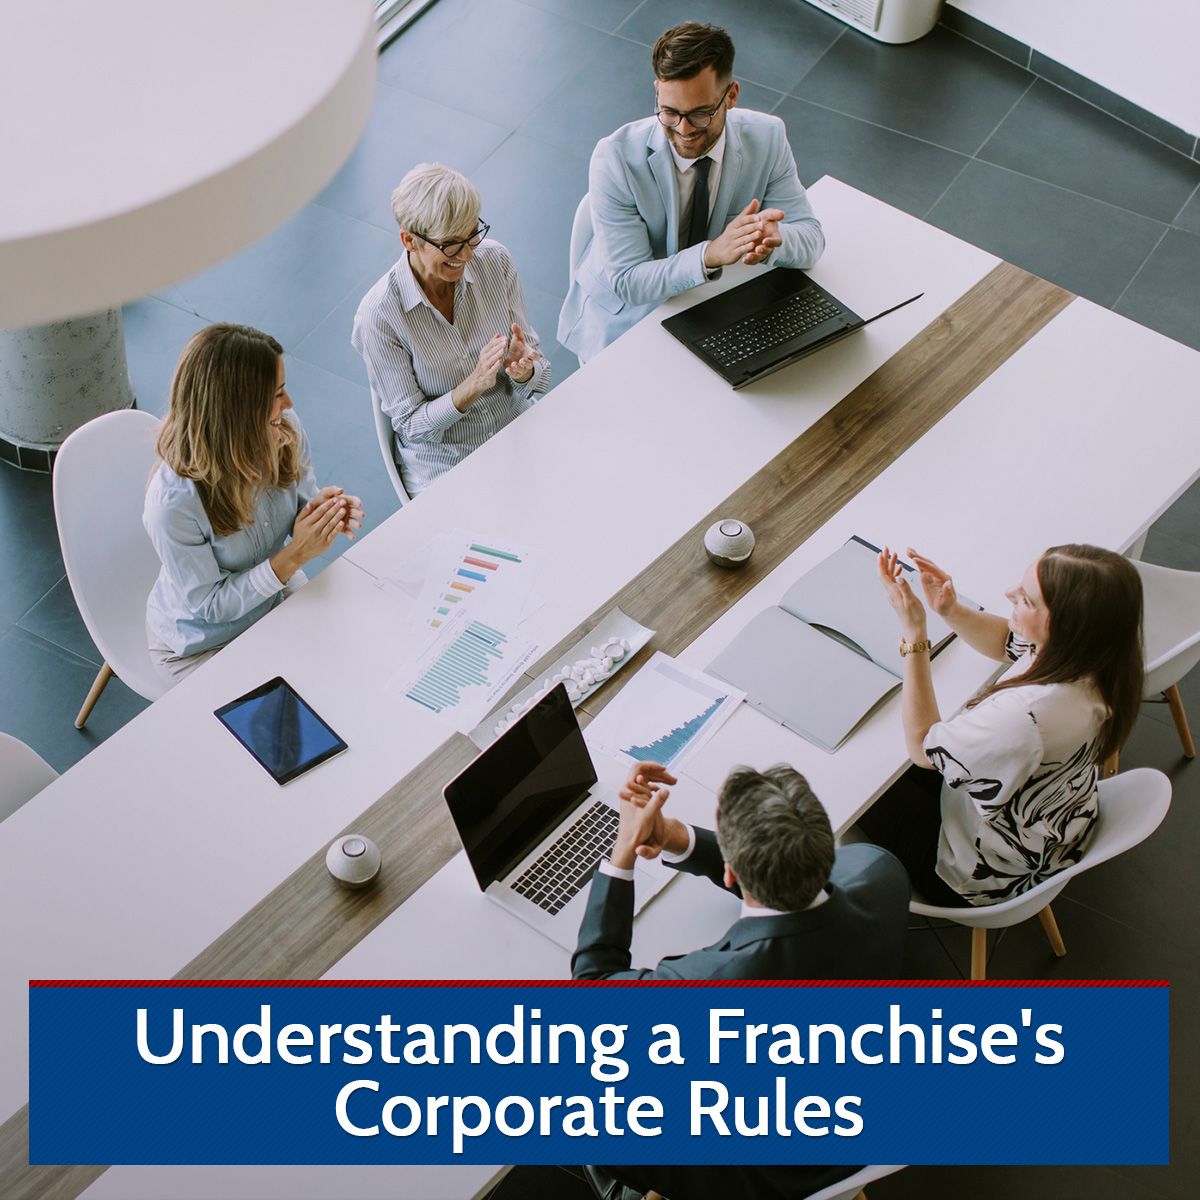 Understanding a Franchise's Corporate Rules